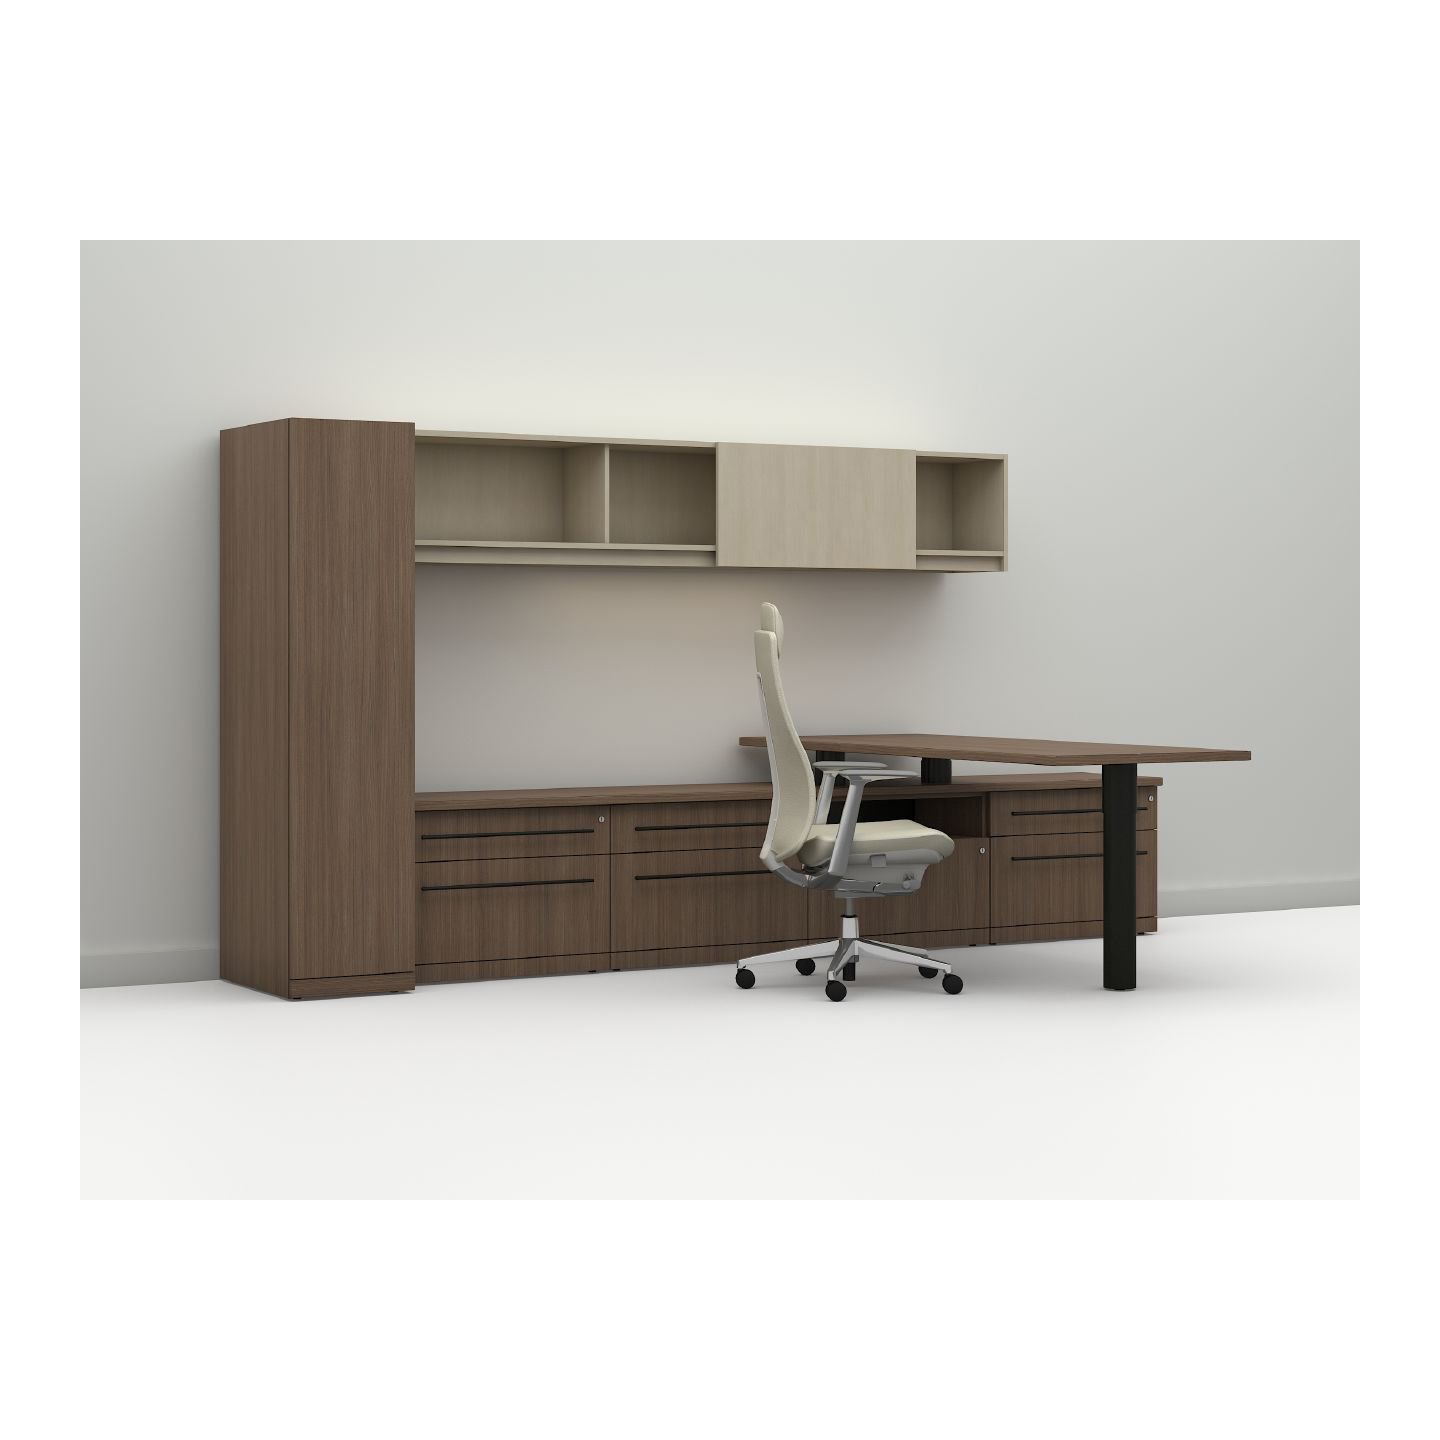 Haworth Masters Series Workspace in oak color with cream colored chair